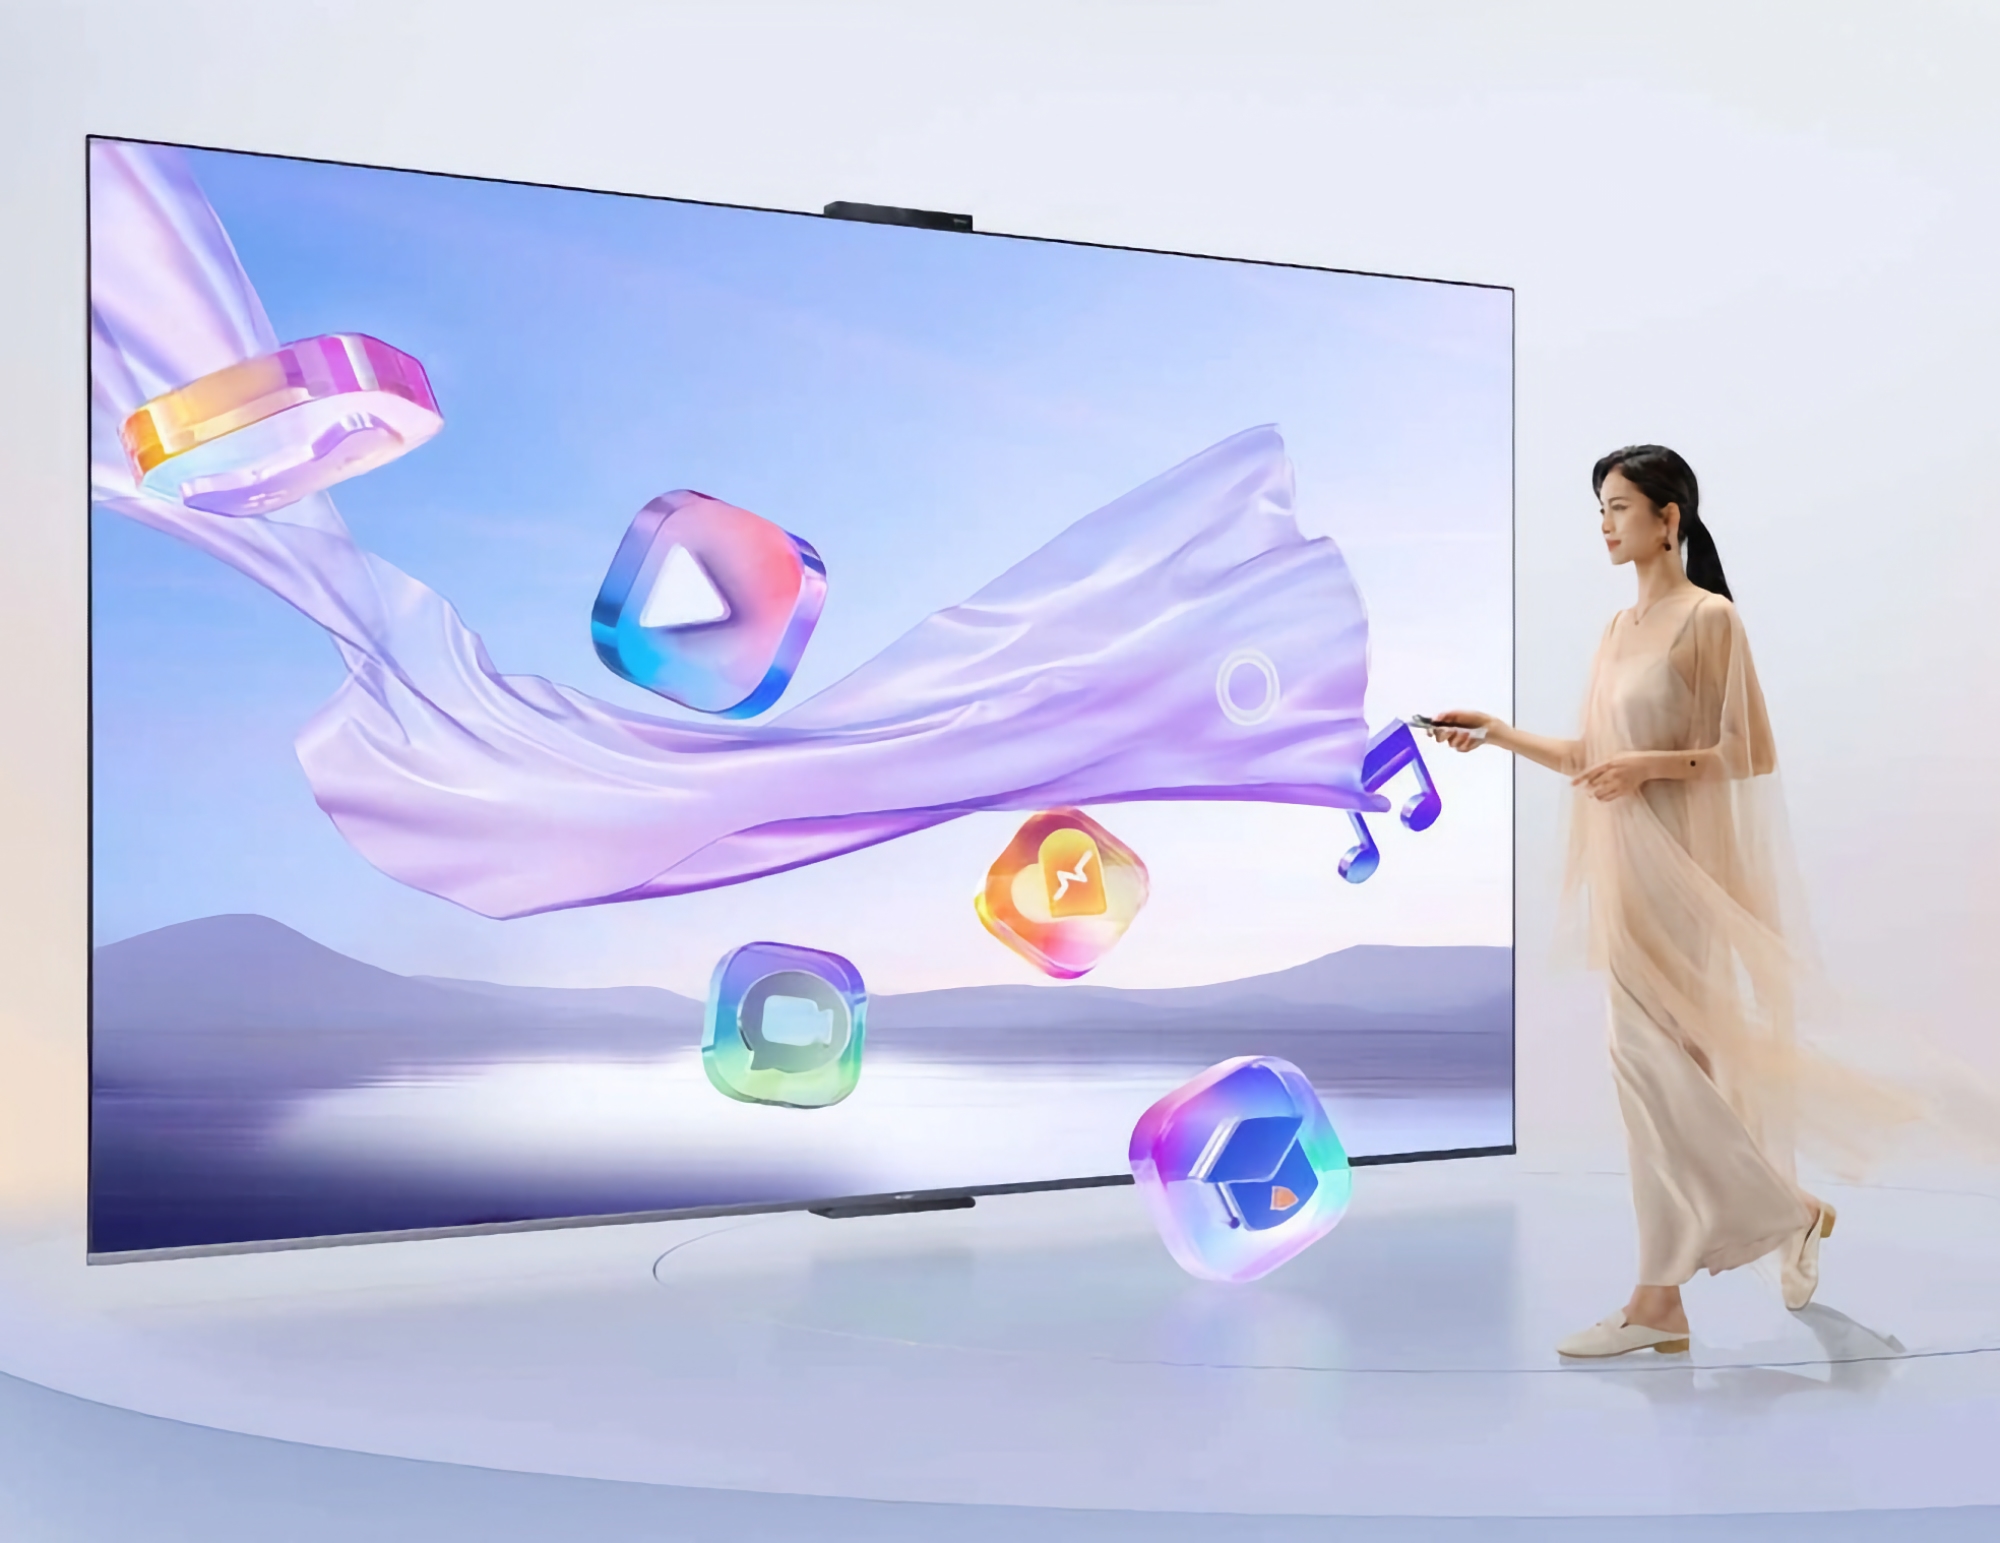 Huawei Vision Smart Screen 4: a range of 4K TVs with screens from 65 to 86 inches, AI Vision chip, HarmonyOS on board and prices starting from $690